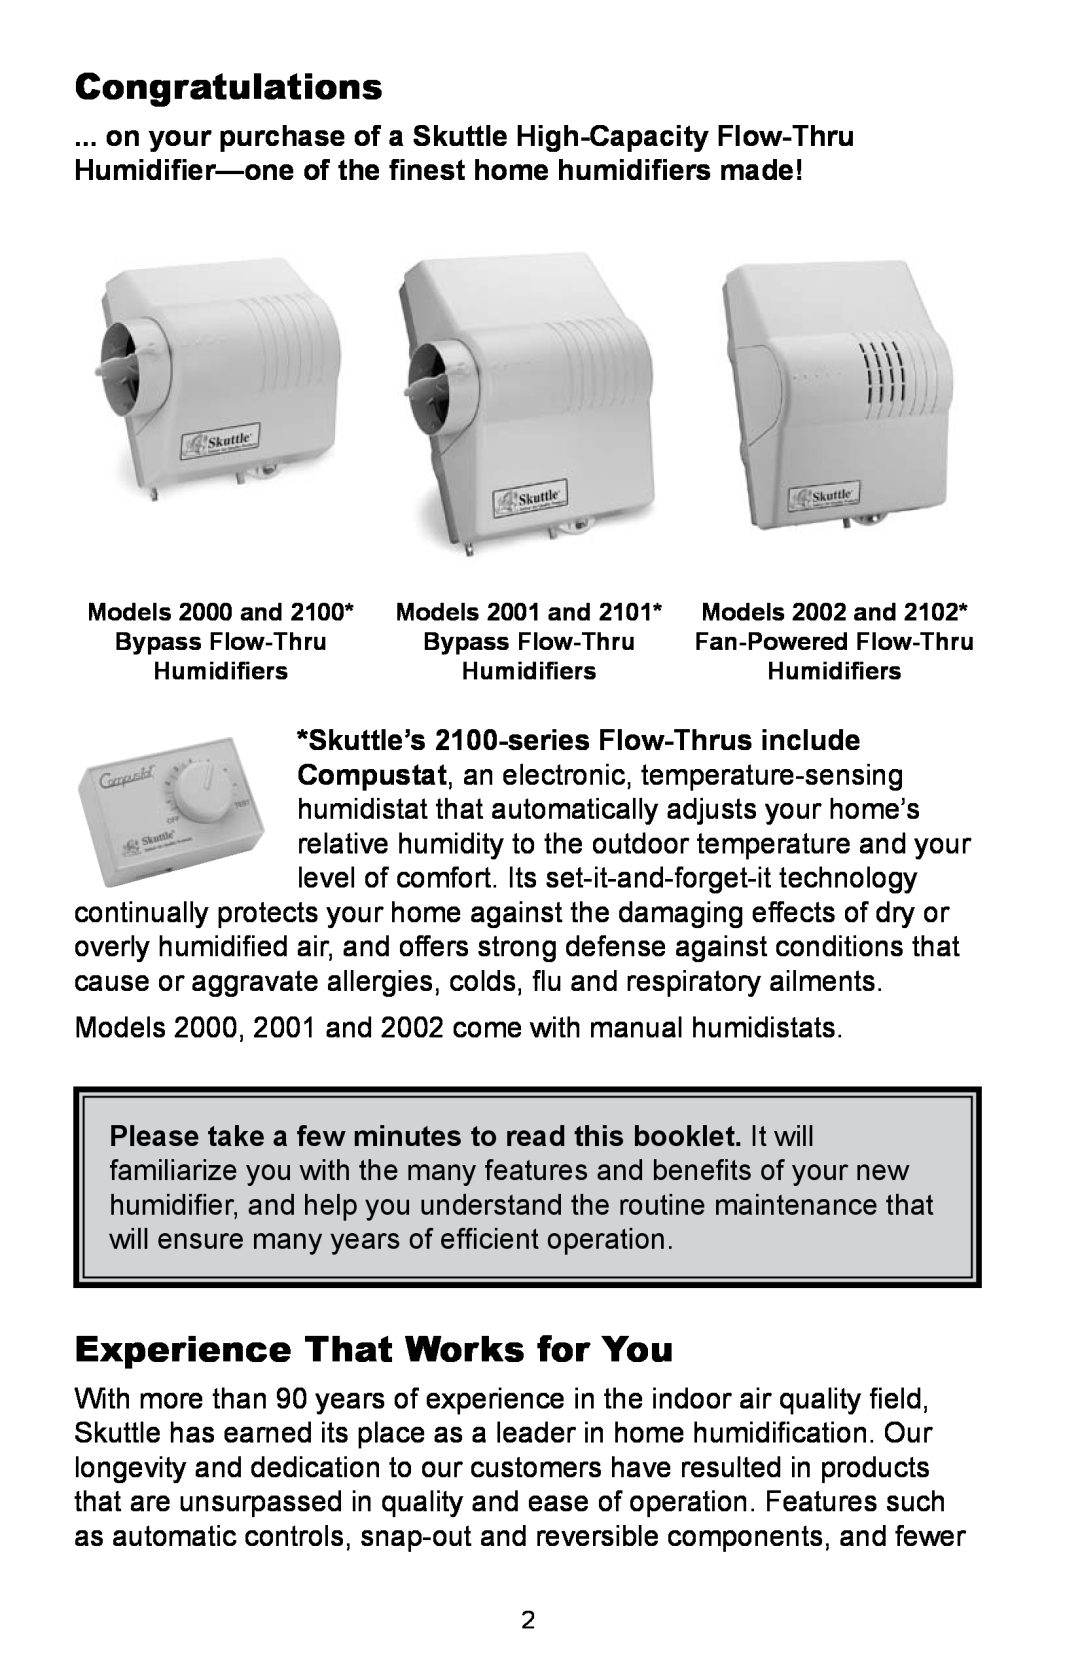 Skuttle Indoor Air Quality Products 2100, 2102 owner manual Congratulations, Experience That Works for You, Bypass Flow-Thru 